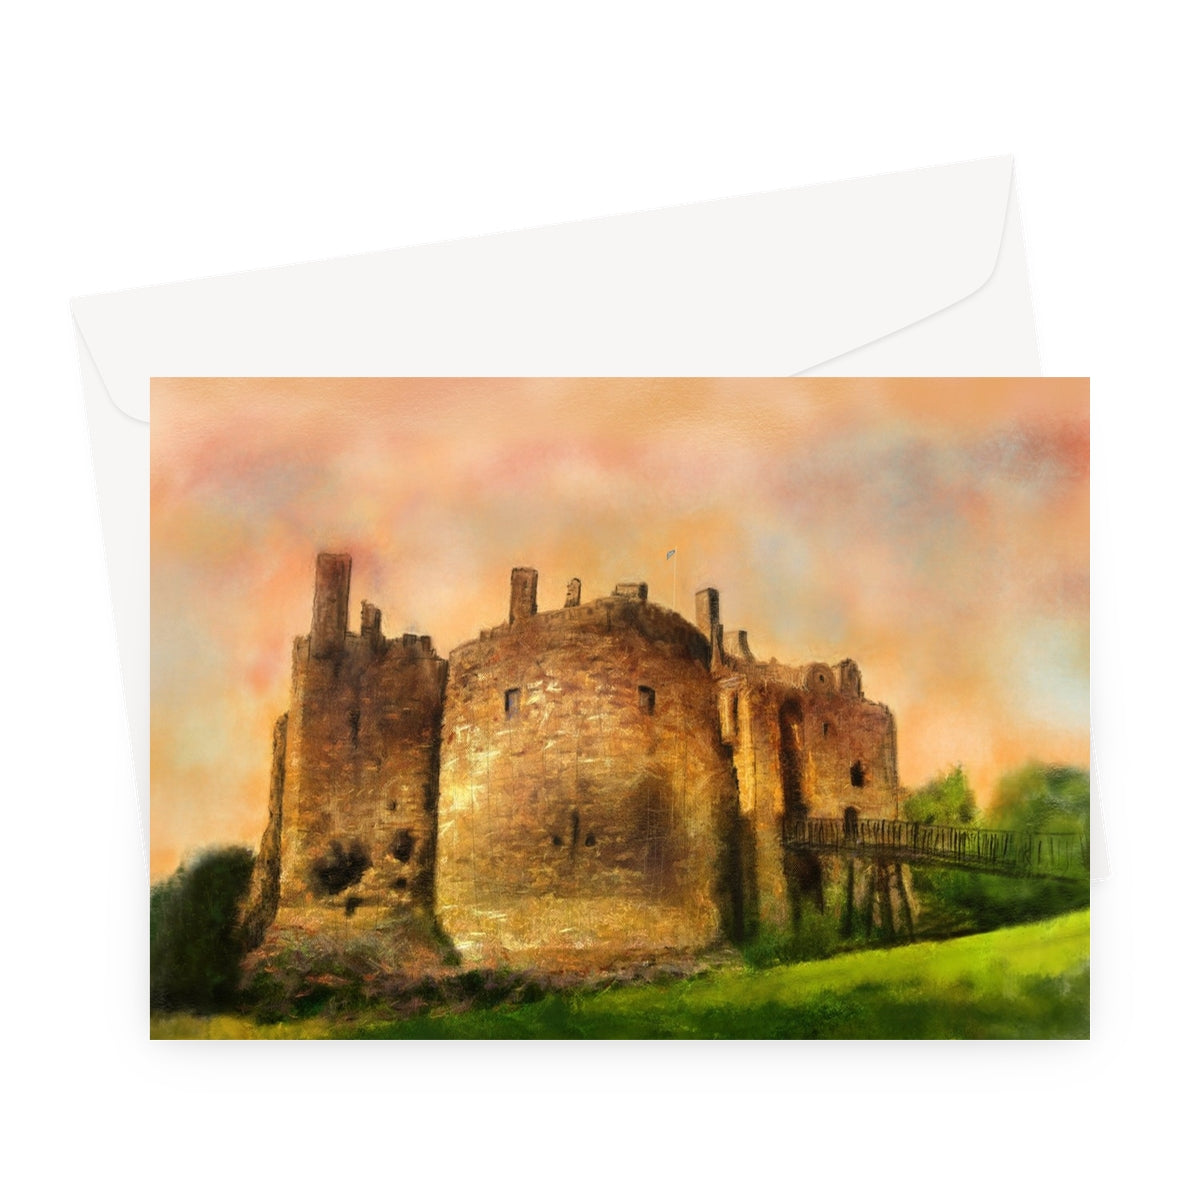 Dirleton Castle Art Gifts Greeting Card-Stationery-Prodigi-A5 Landscape-1 Card-Paintings, Prints, Homeware, Art Gifts From Scotland By Scottish Artist Kevin Hunter